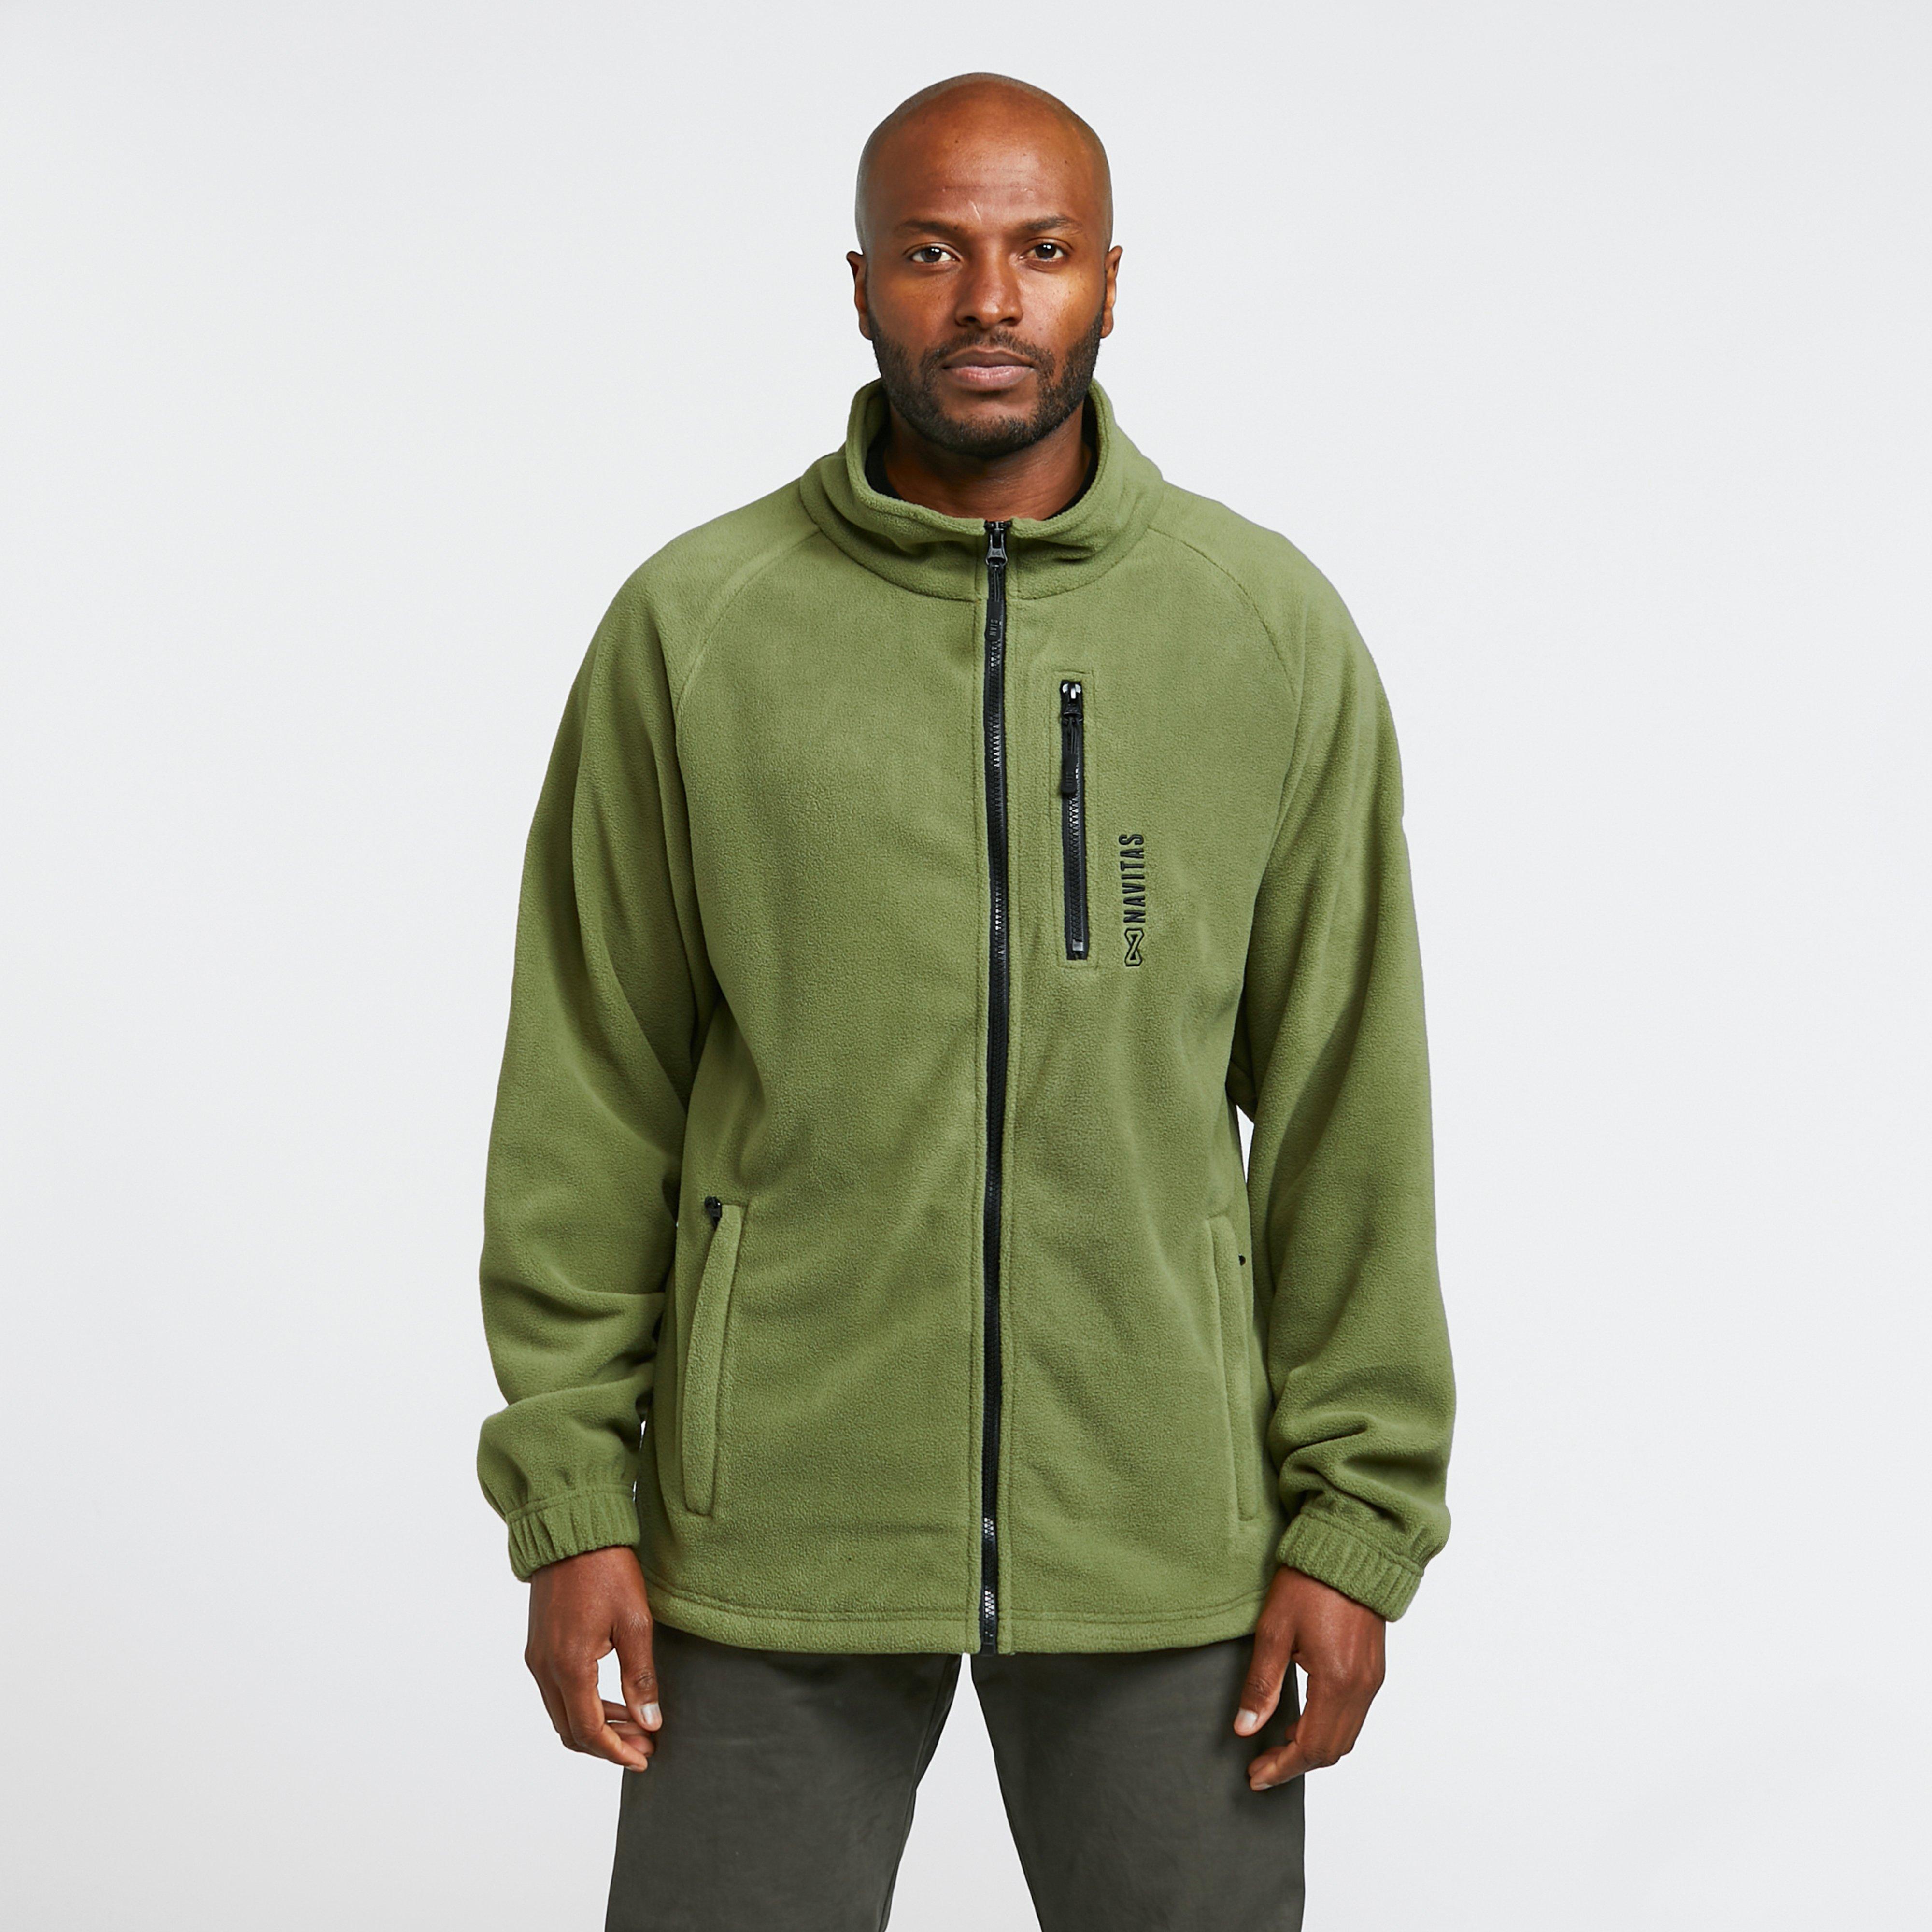 Navitas Hooded Soft Shell Jacket 2 Review